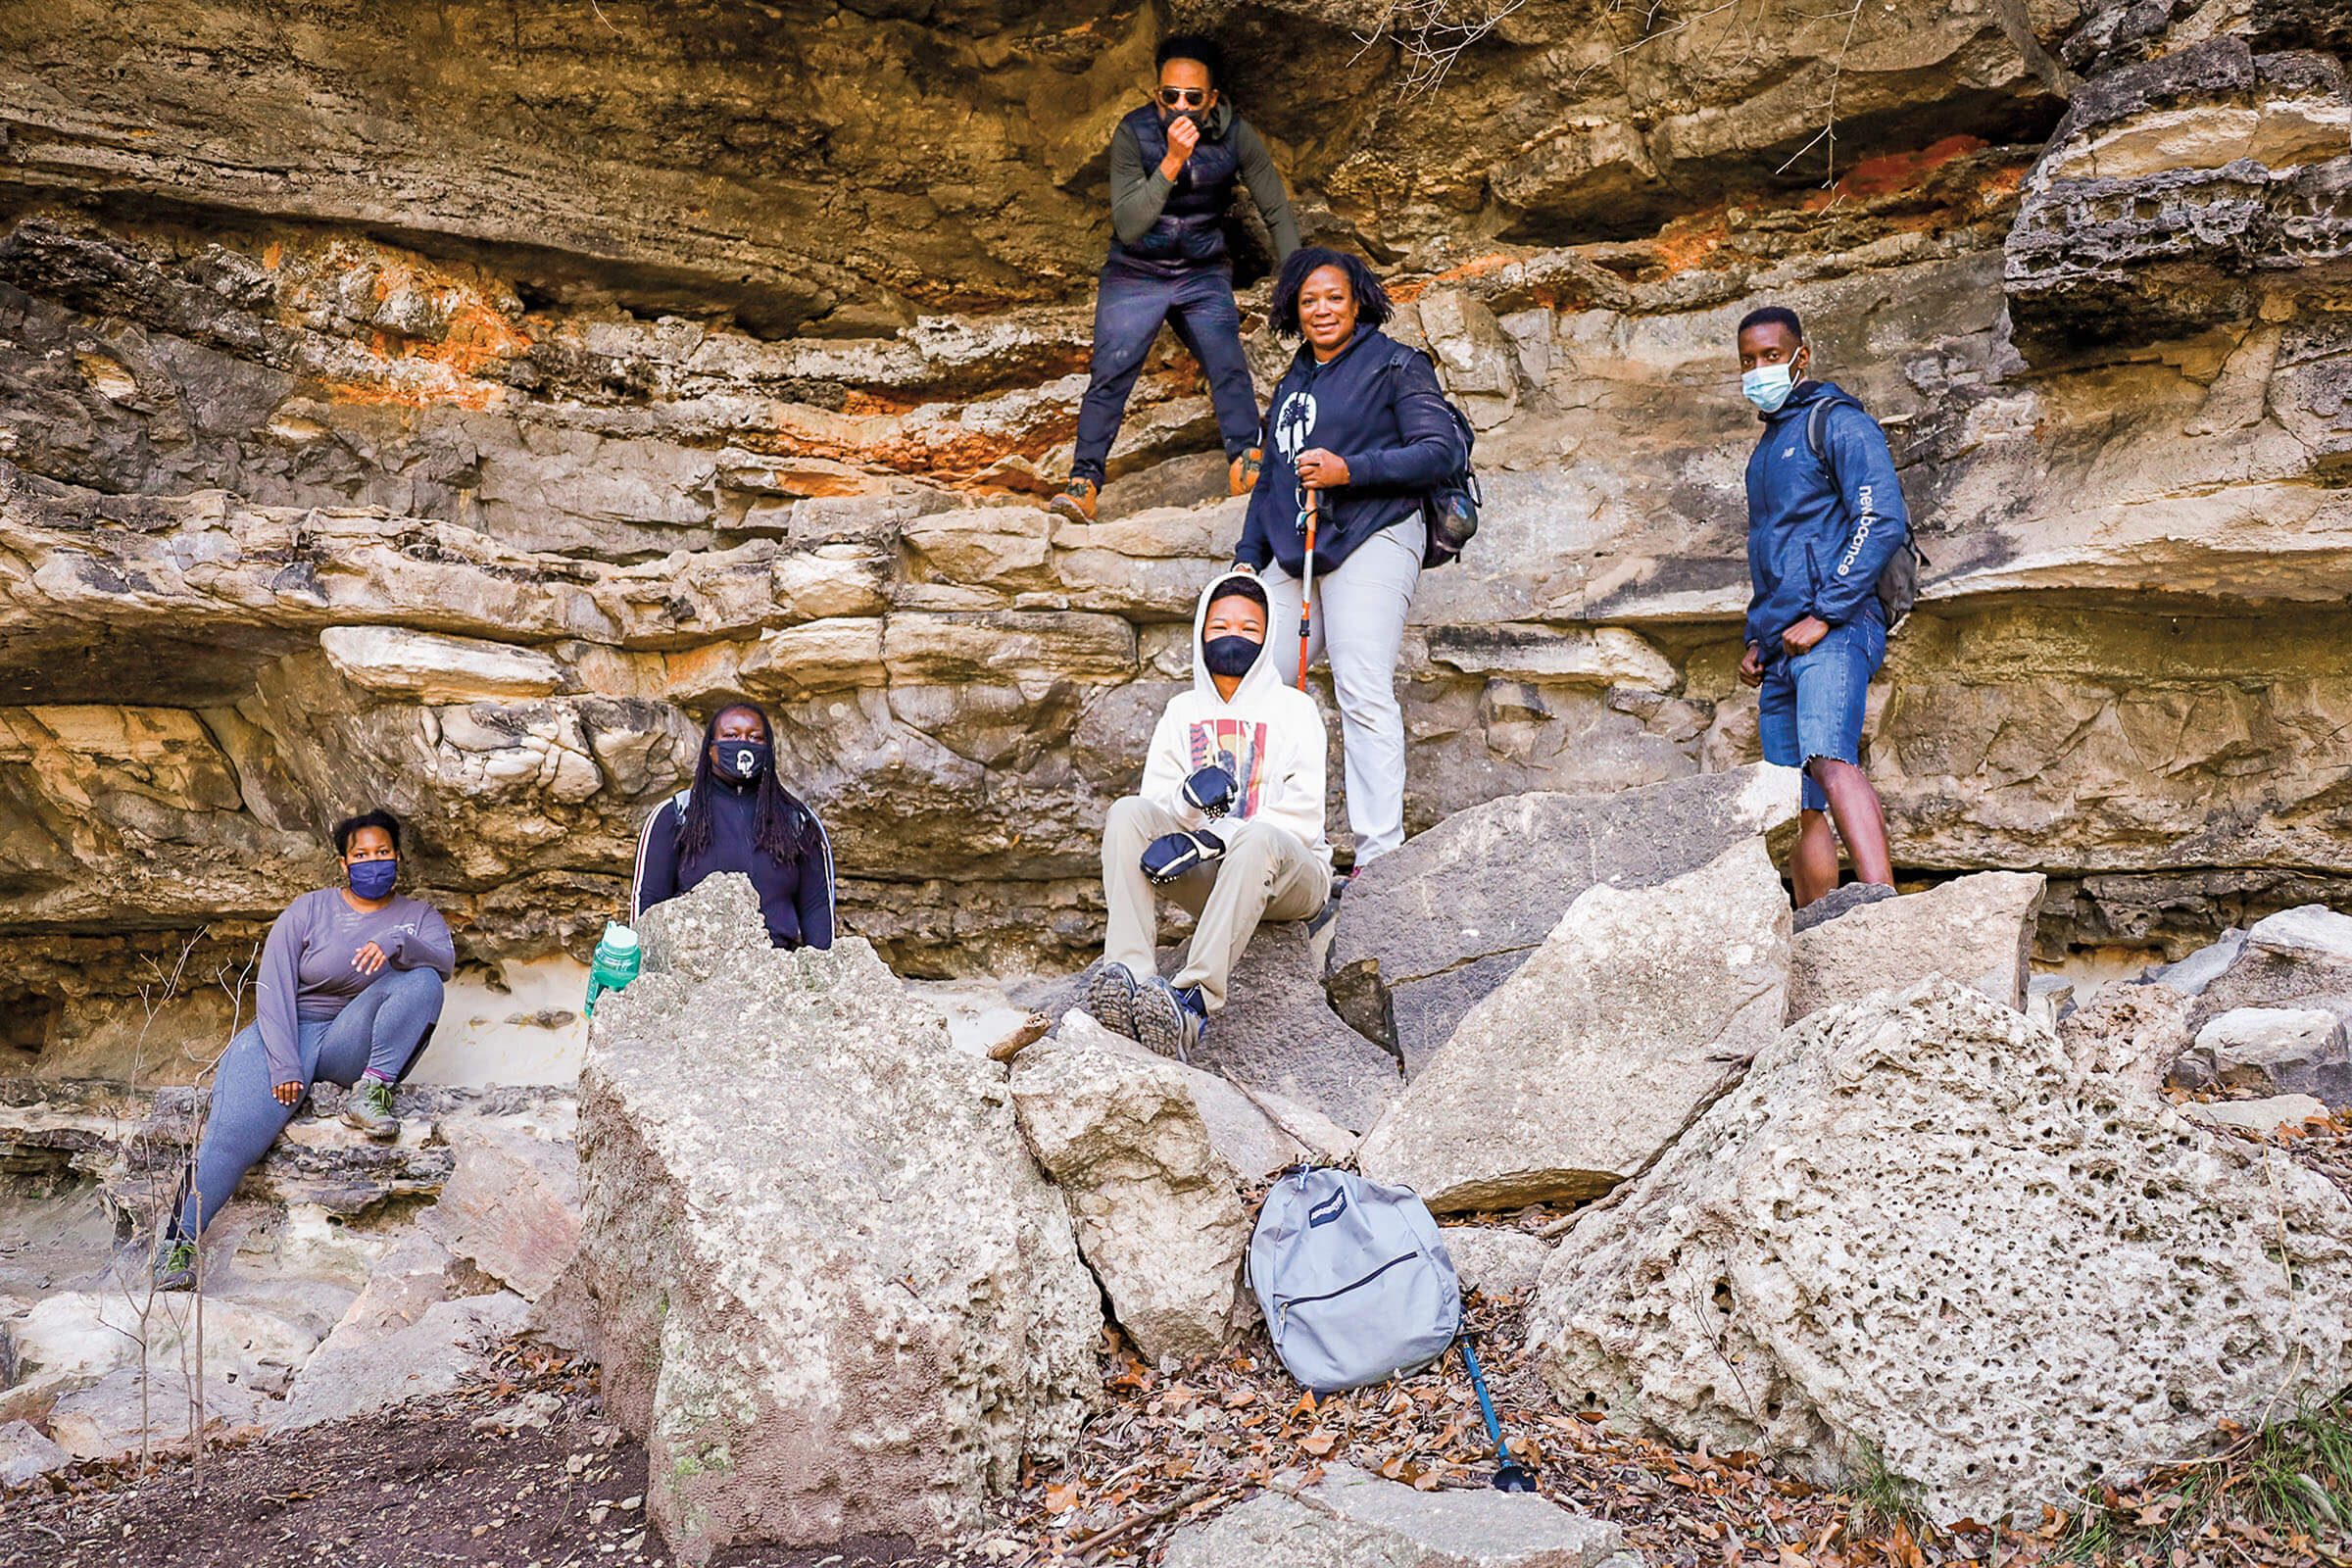 A group of hikers stand among rocks and boulders